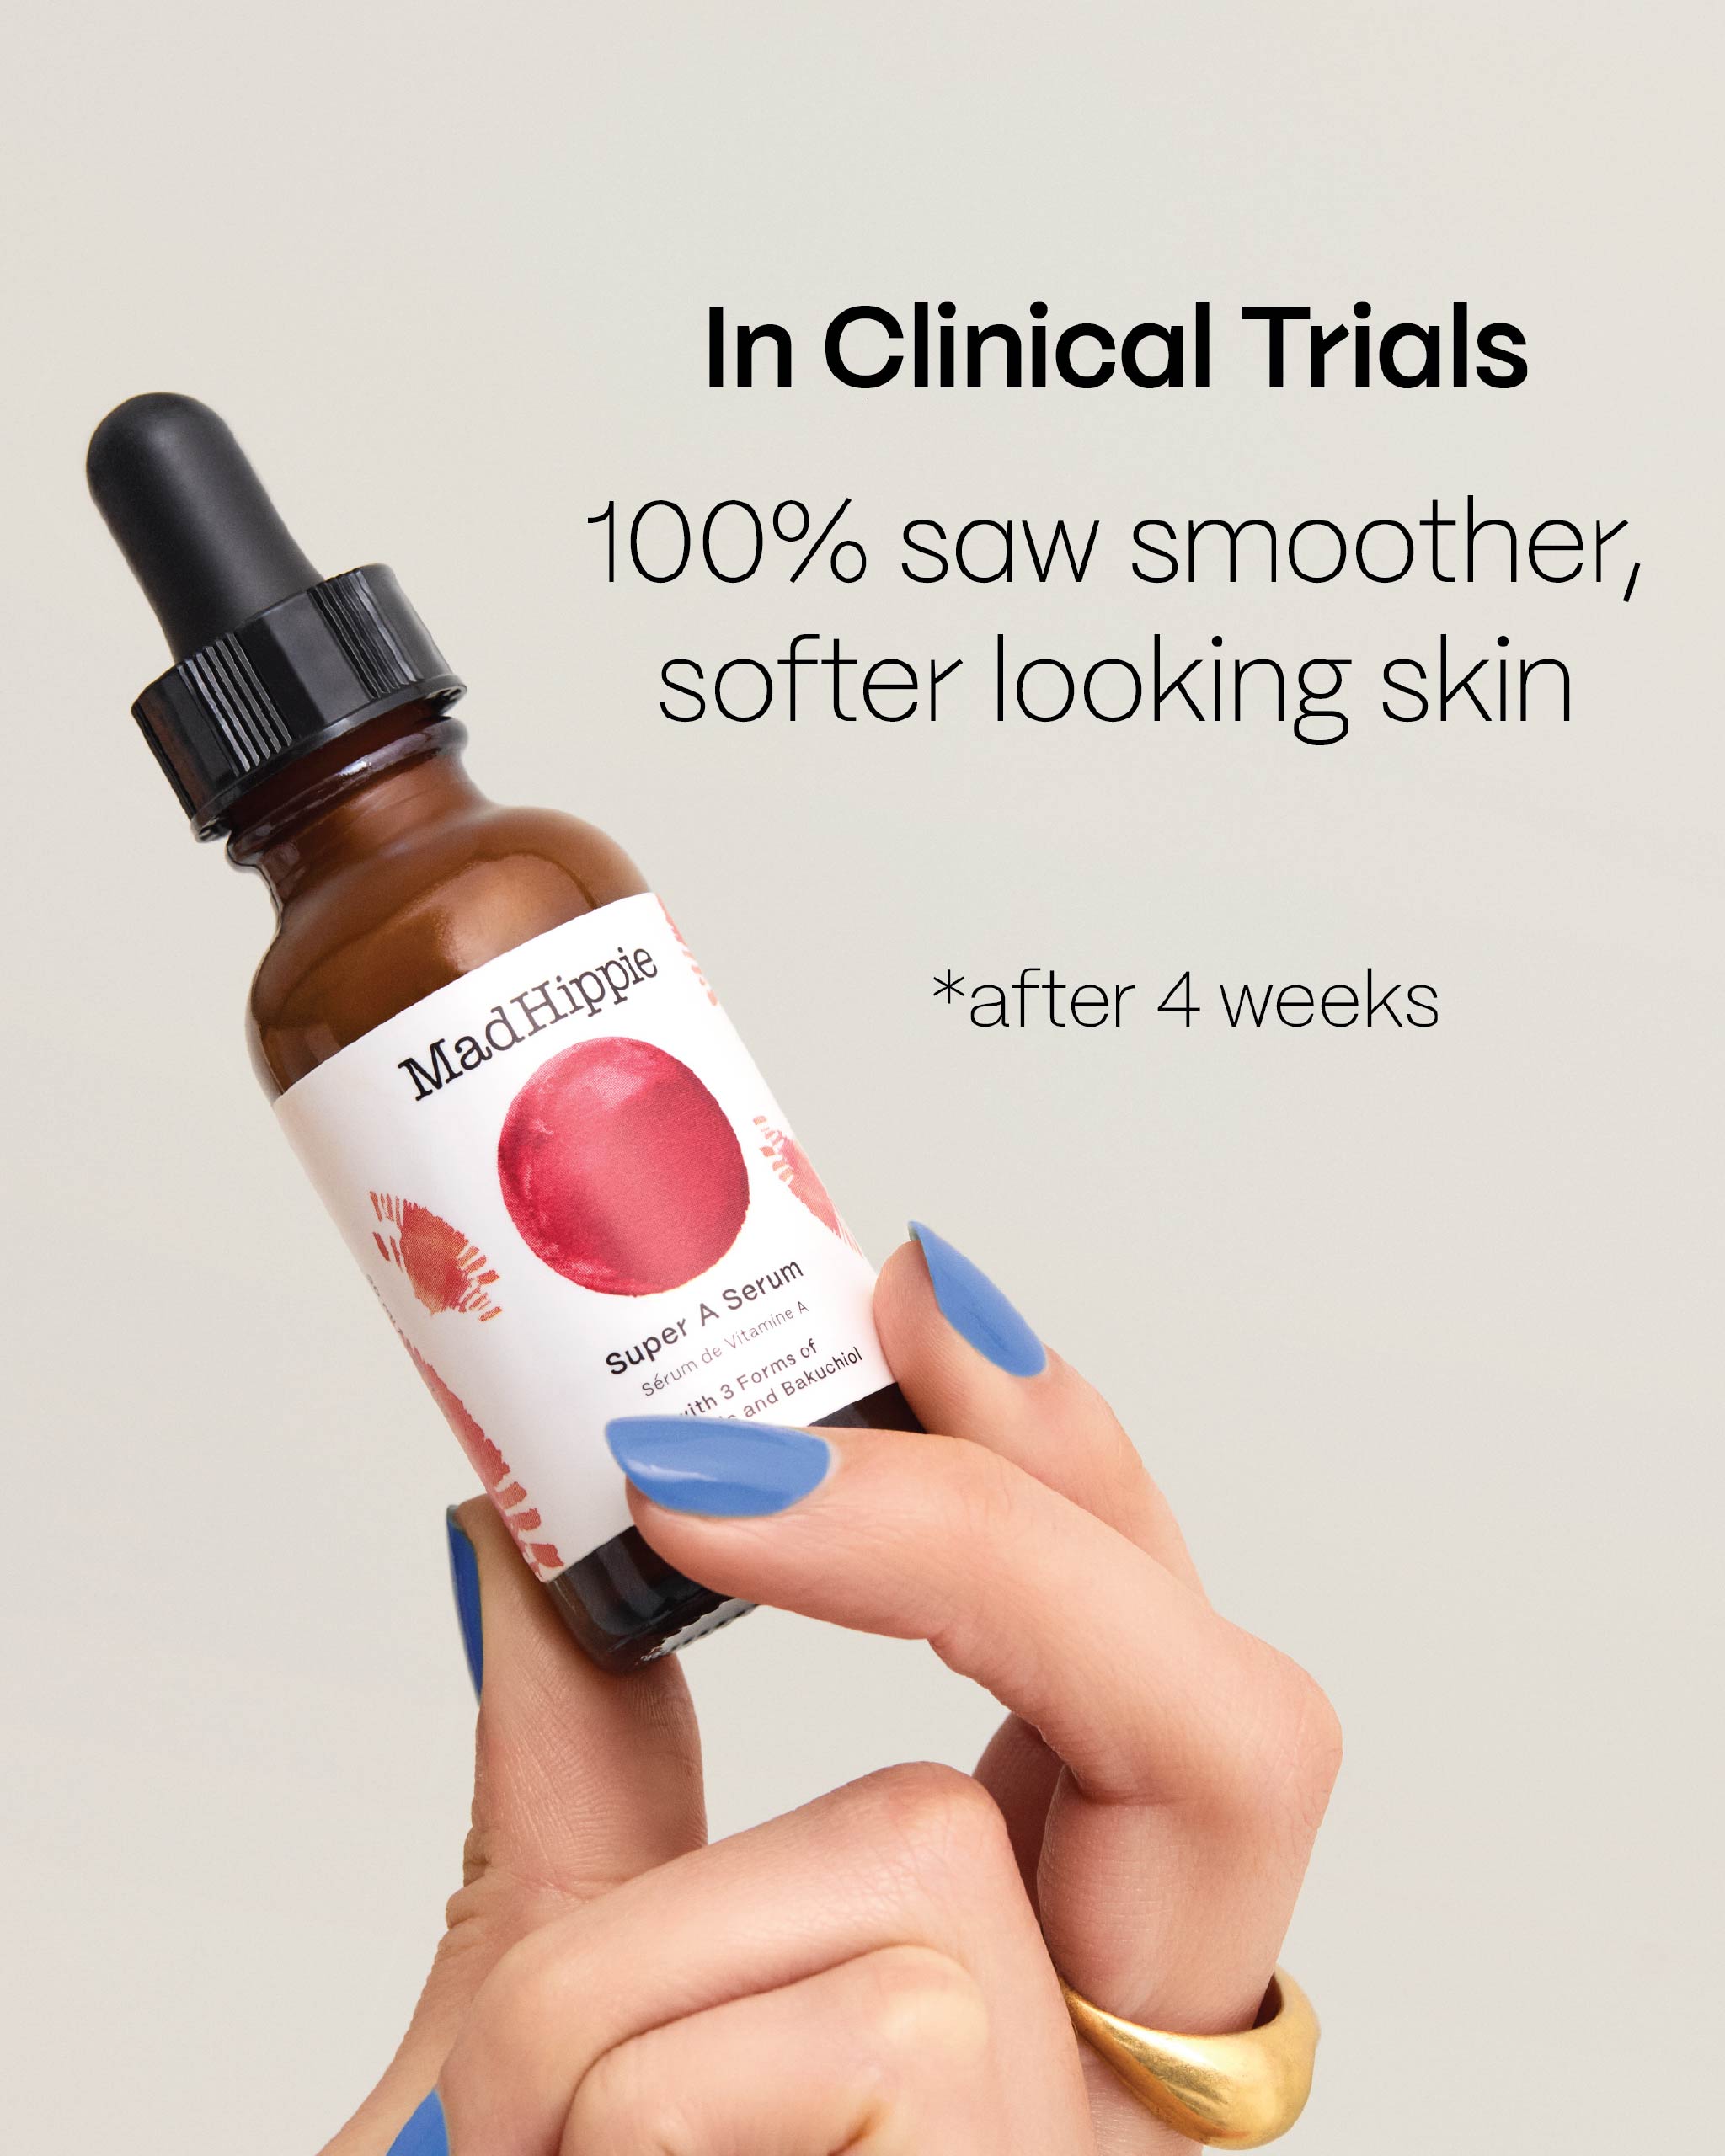 In clinical trials, 100% saw smoother, softer skin with a renewed healthy glow after 4 weeks - Best retinol serum